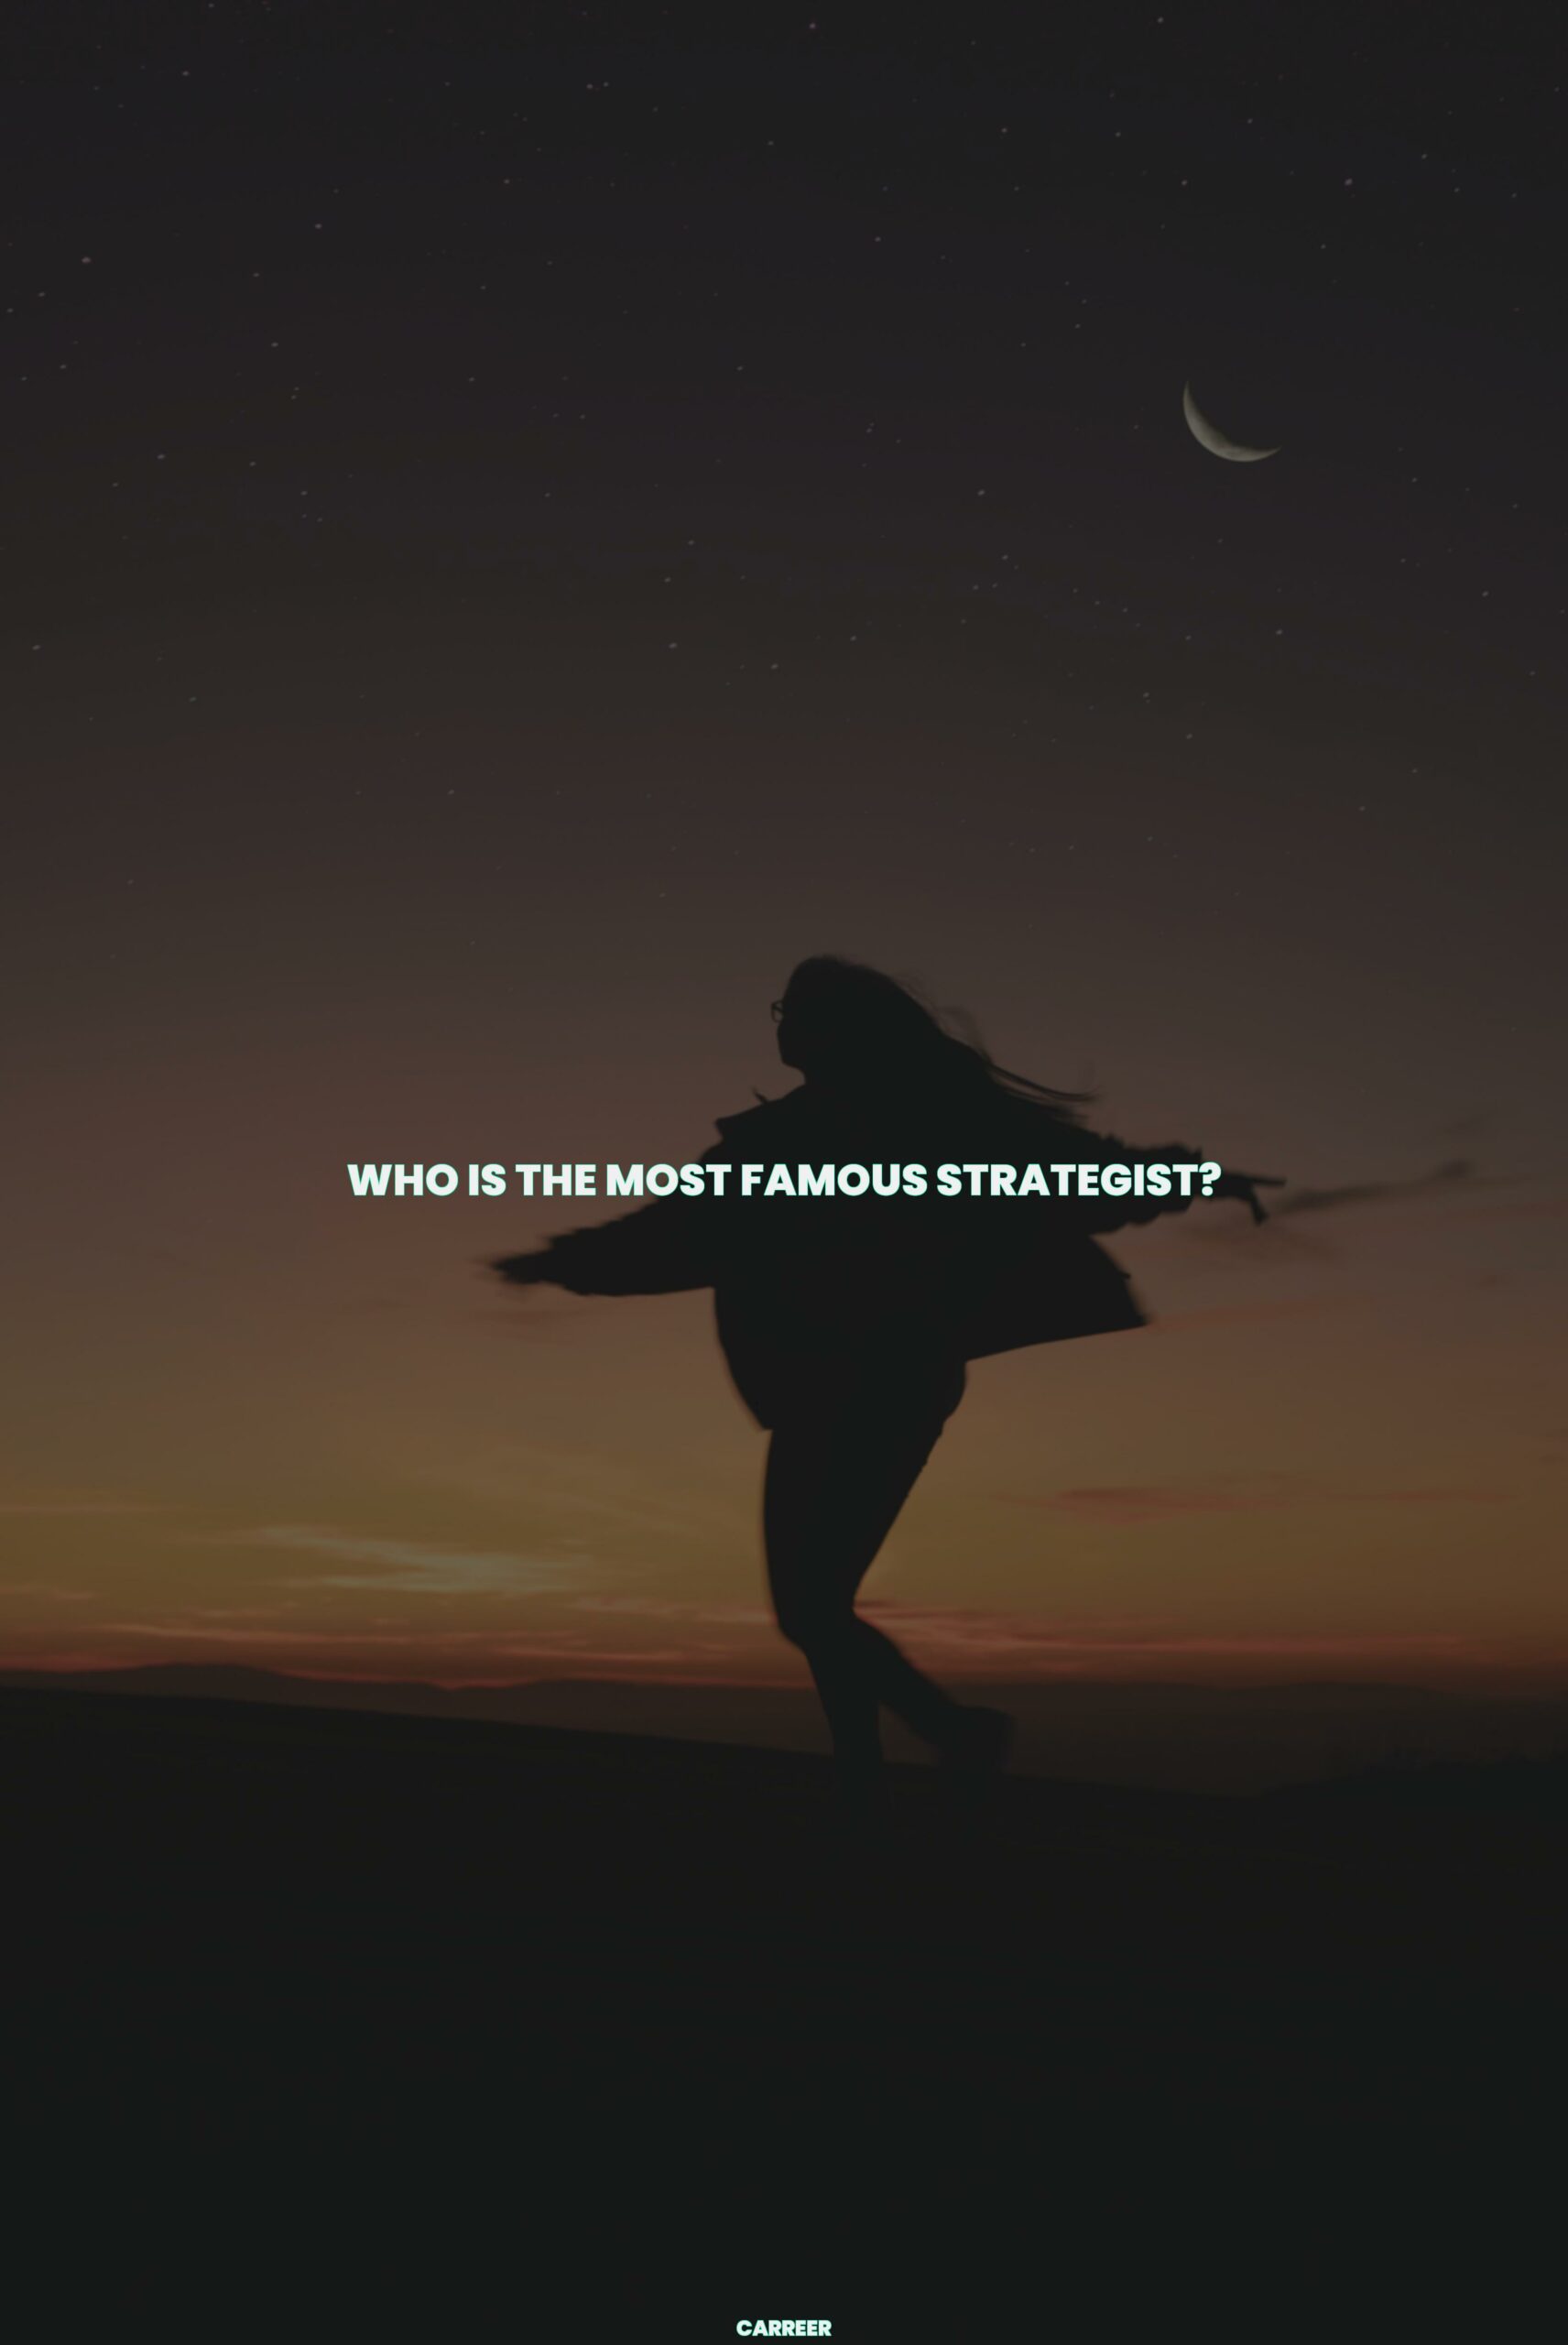 Who is the most famous strategist?